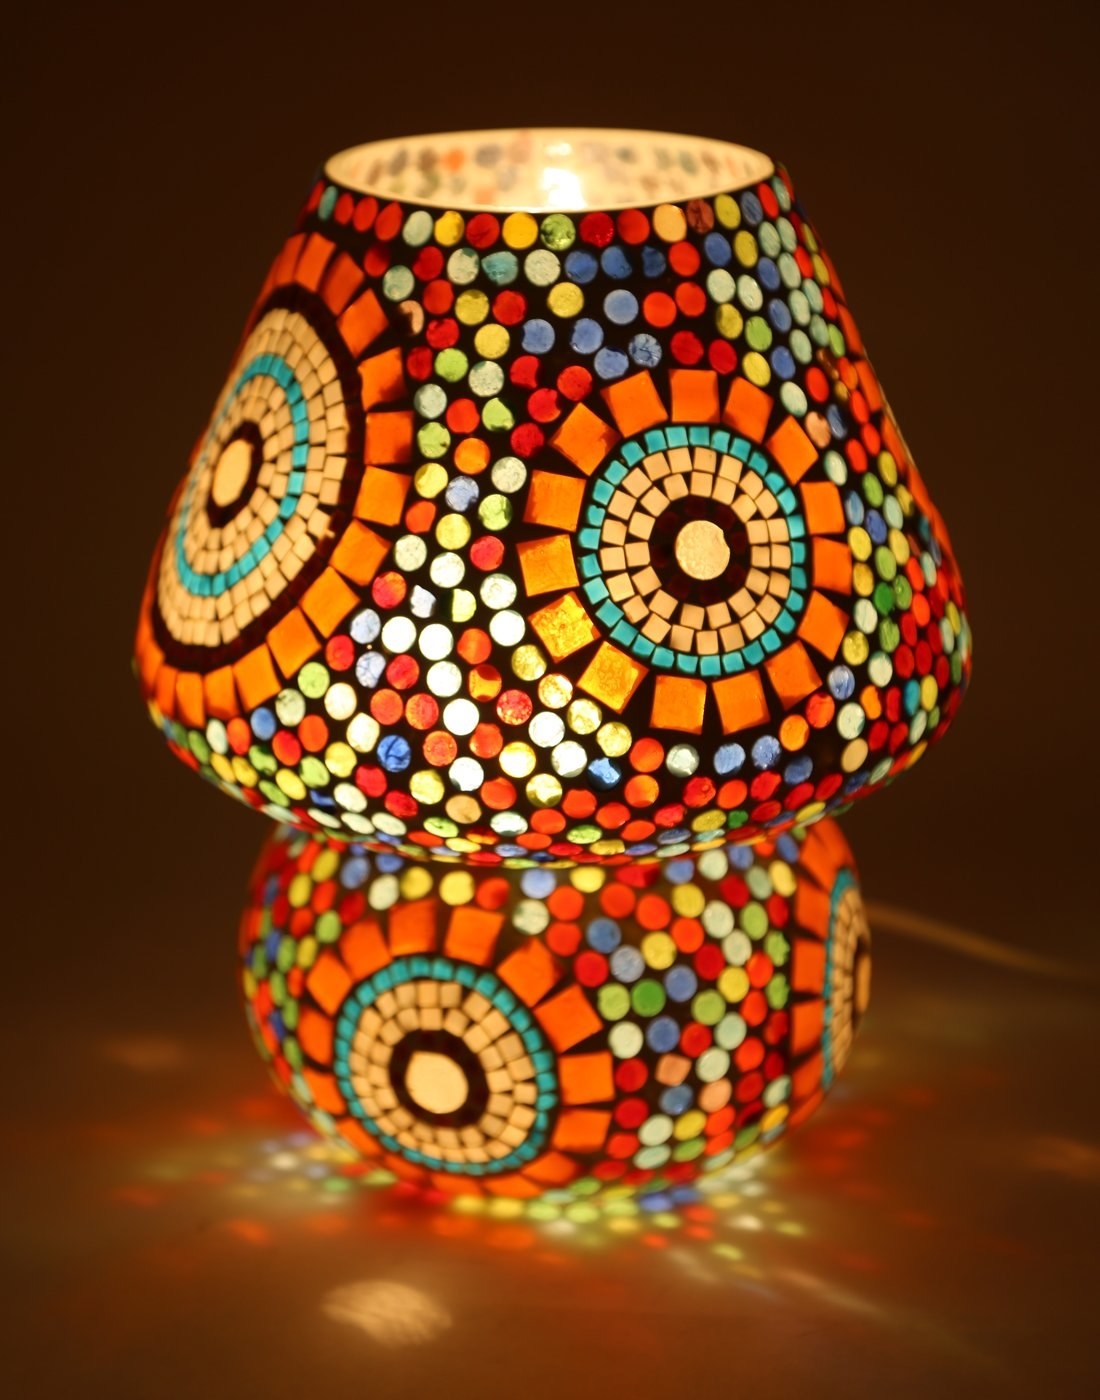 A mosaic lamp on a table